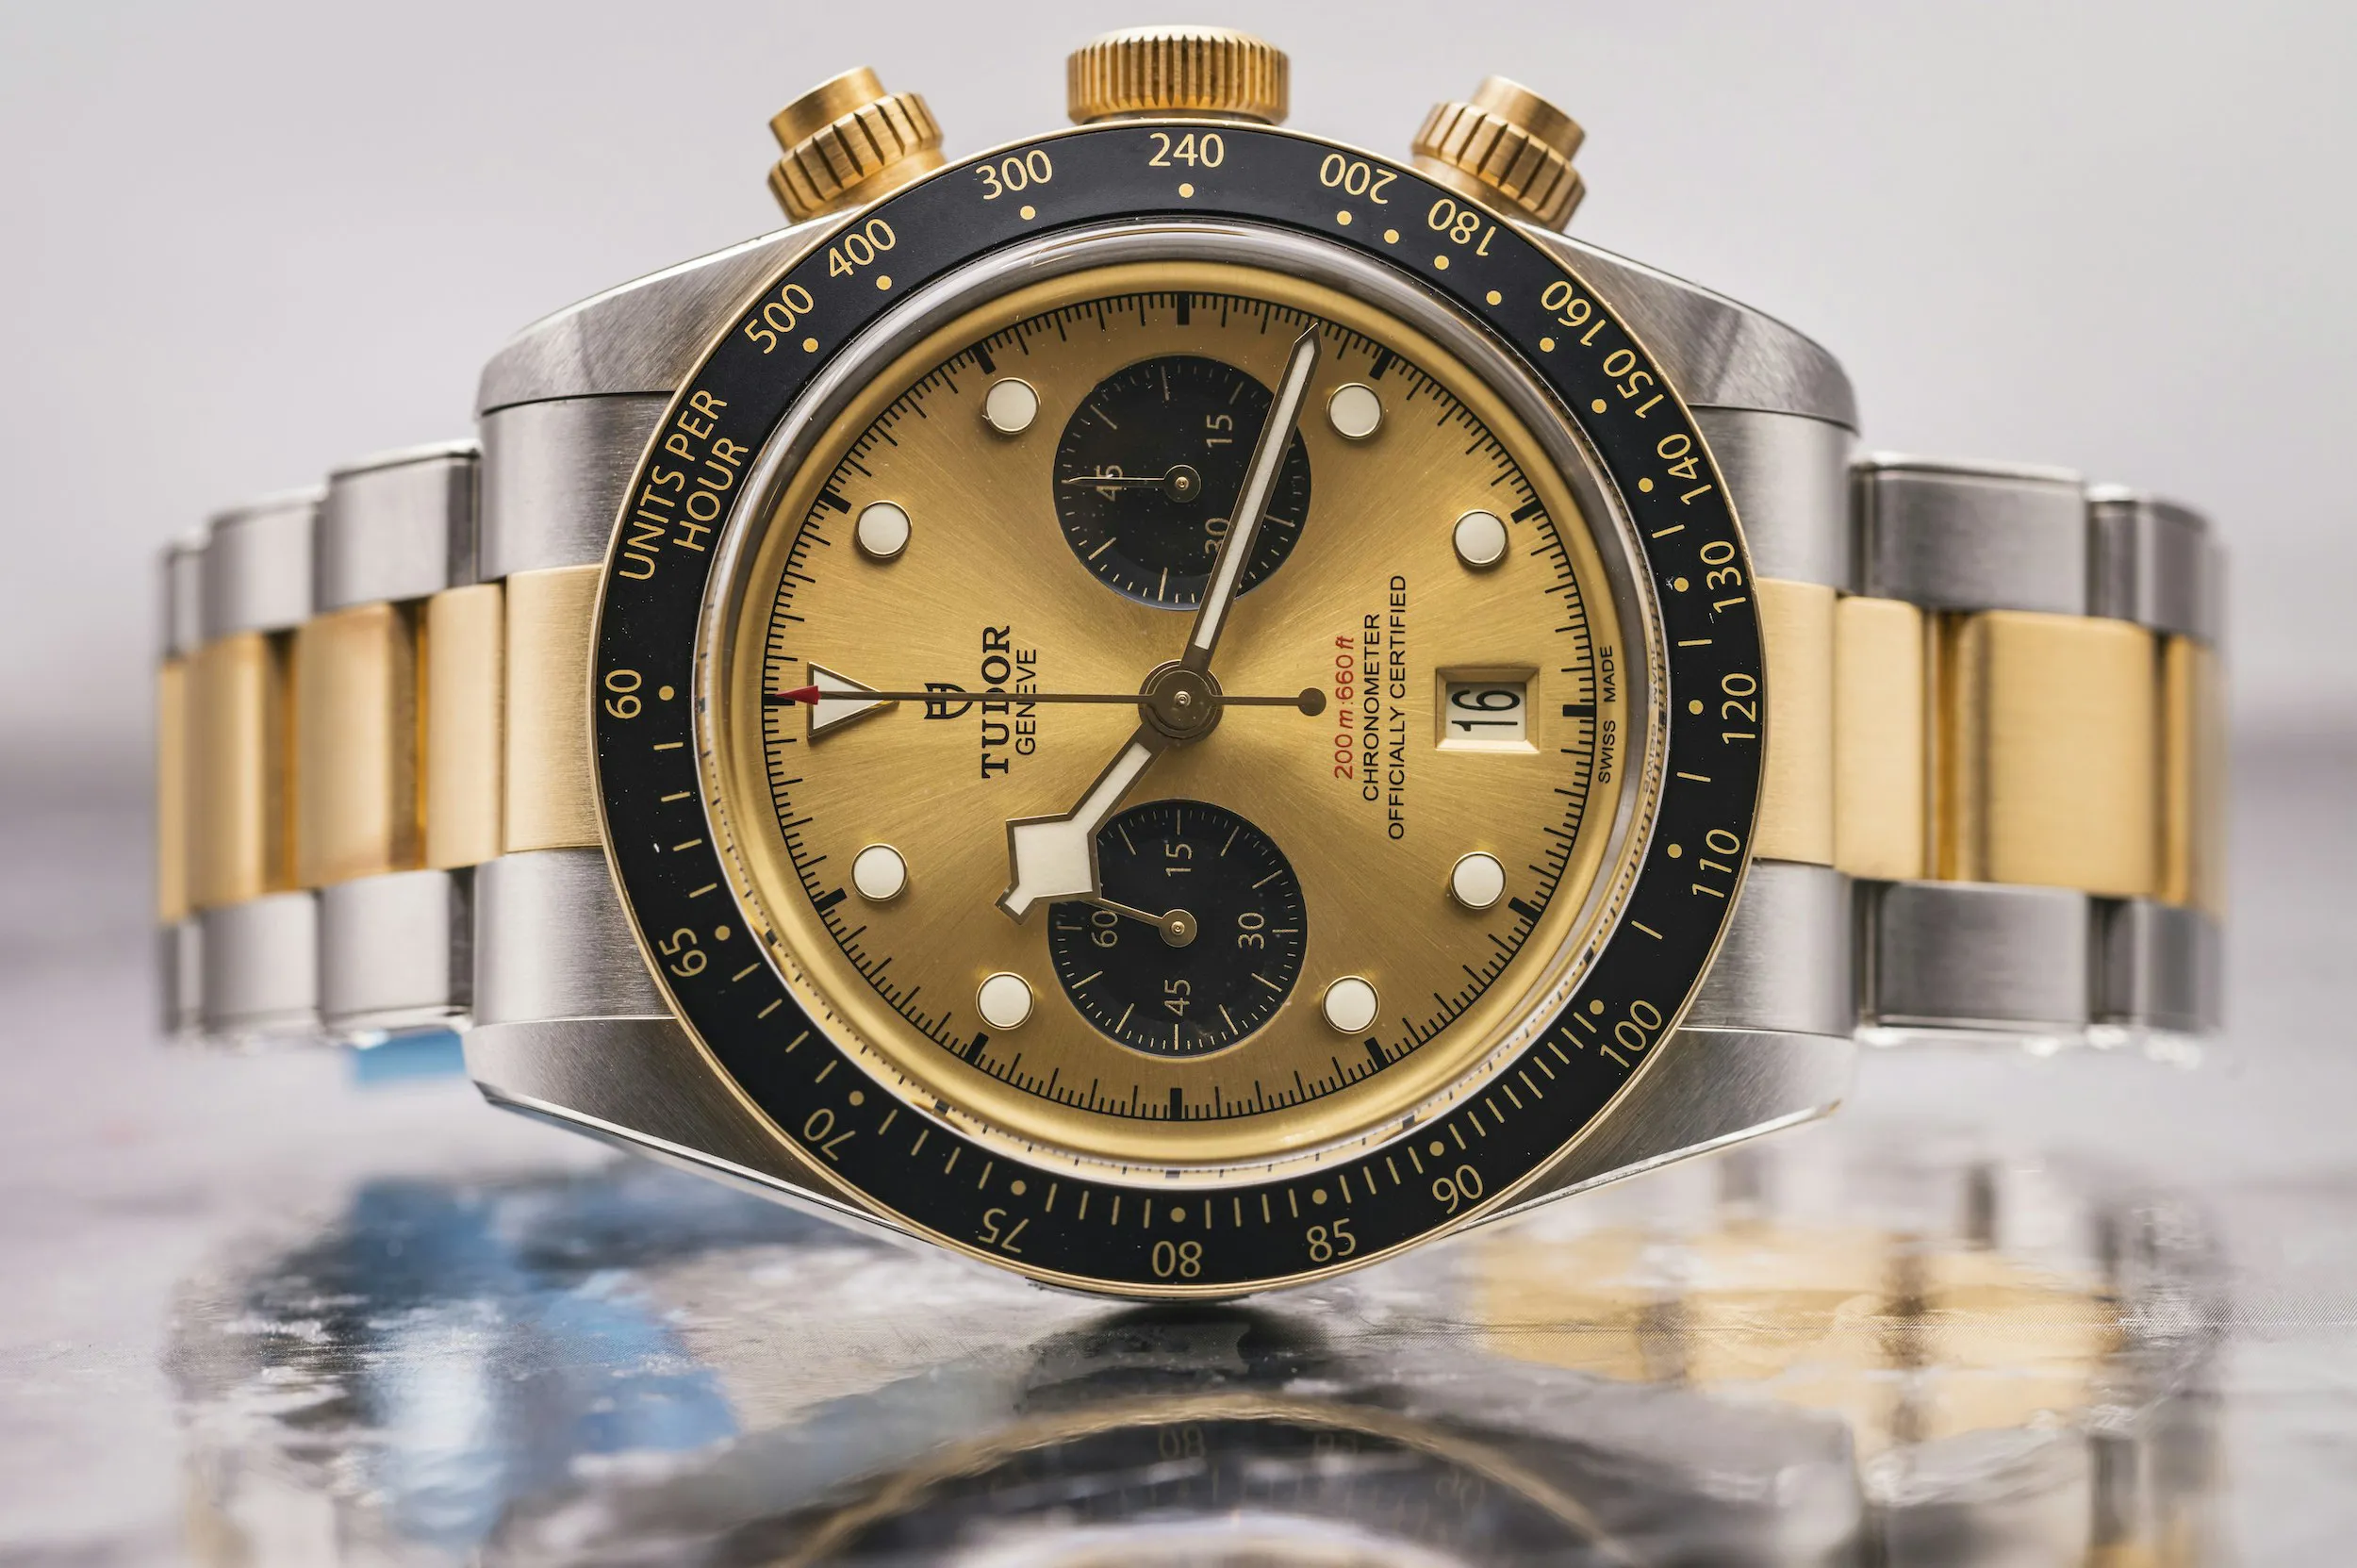 Tudor Black Bay Chrono S&G  M7936N-0007 41mm Yellow gold and stainless steel Golden 6